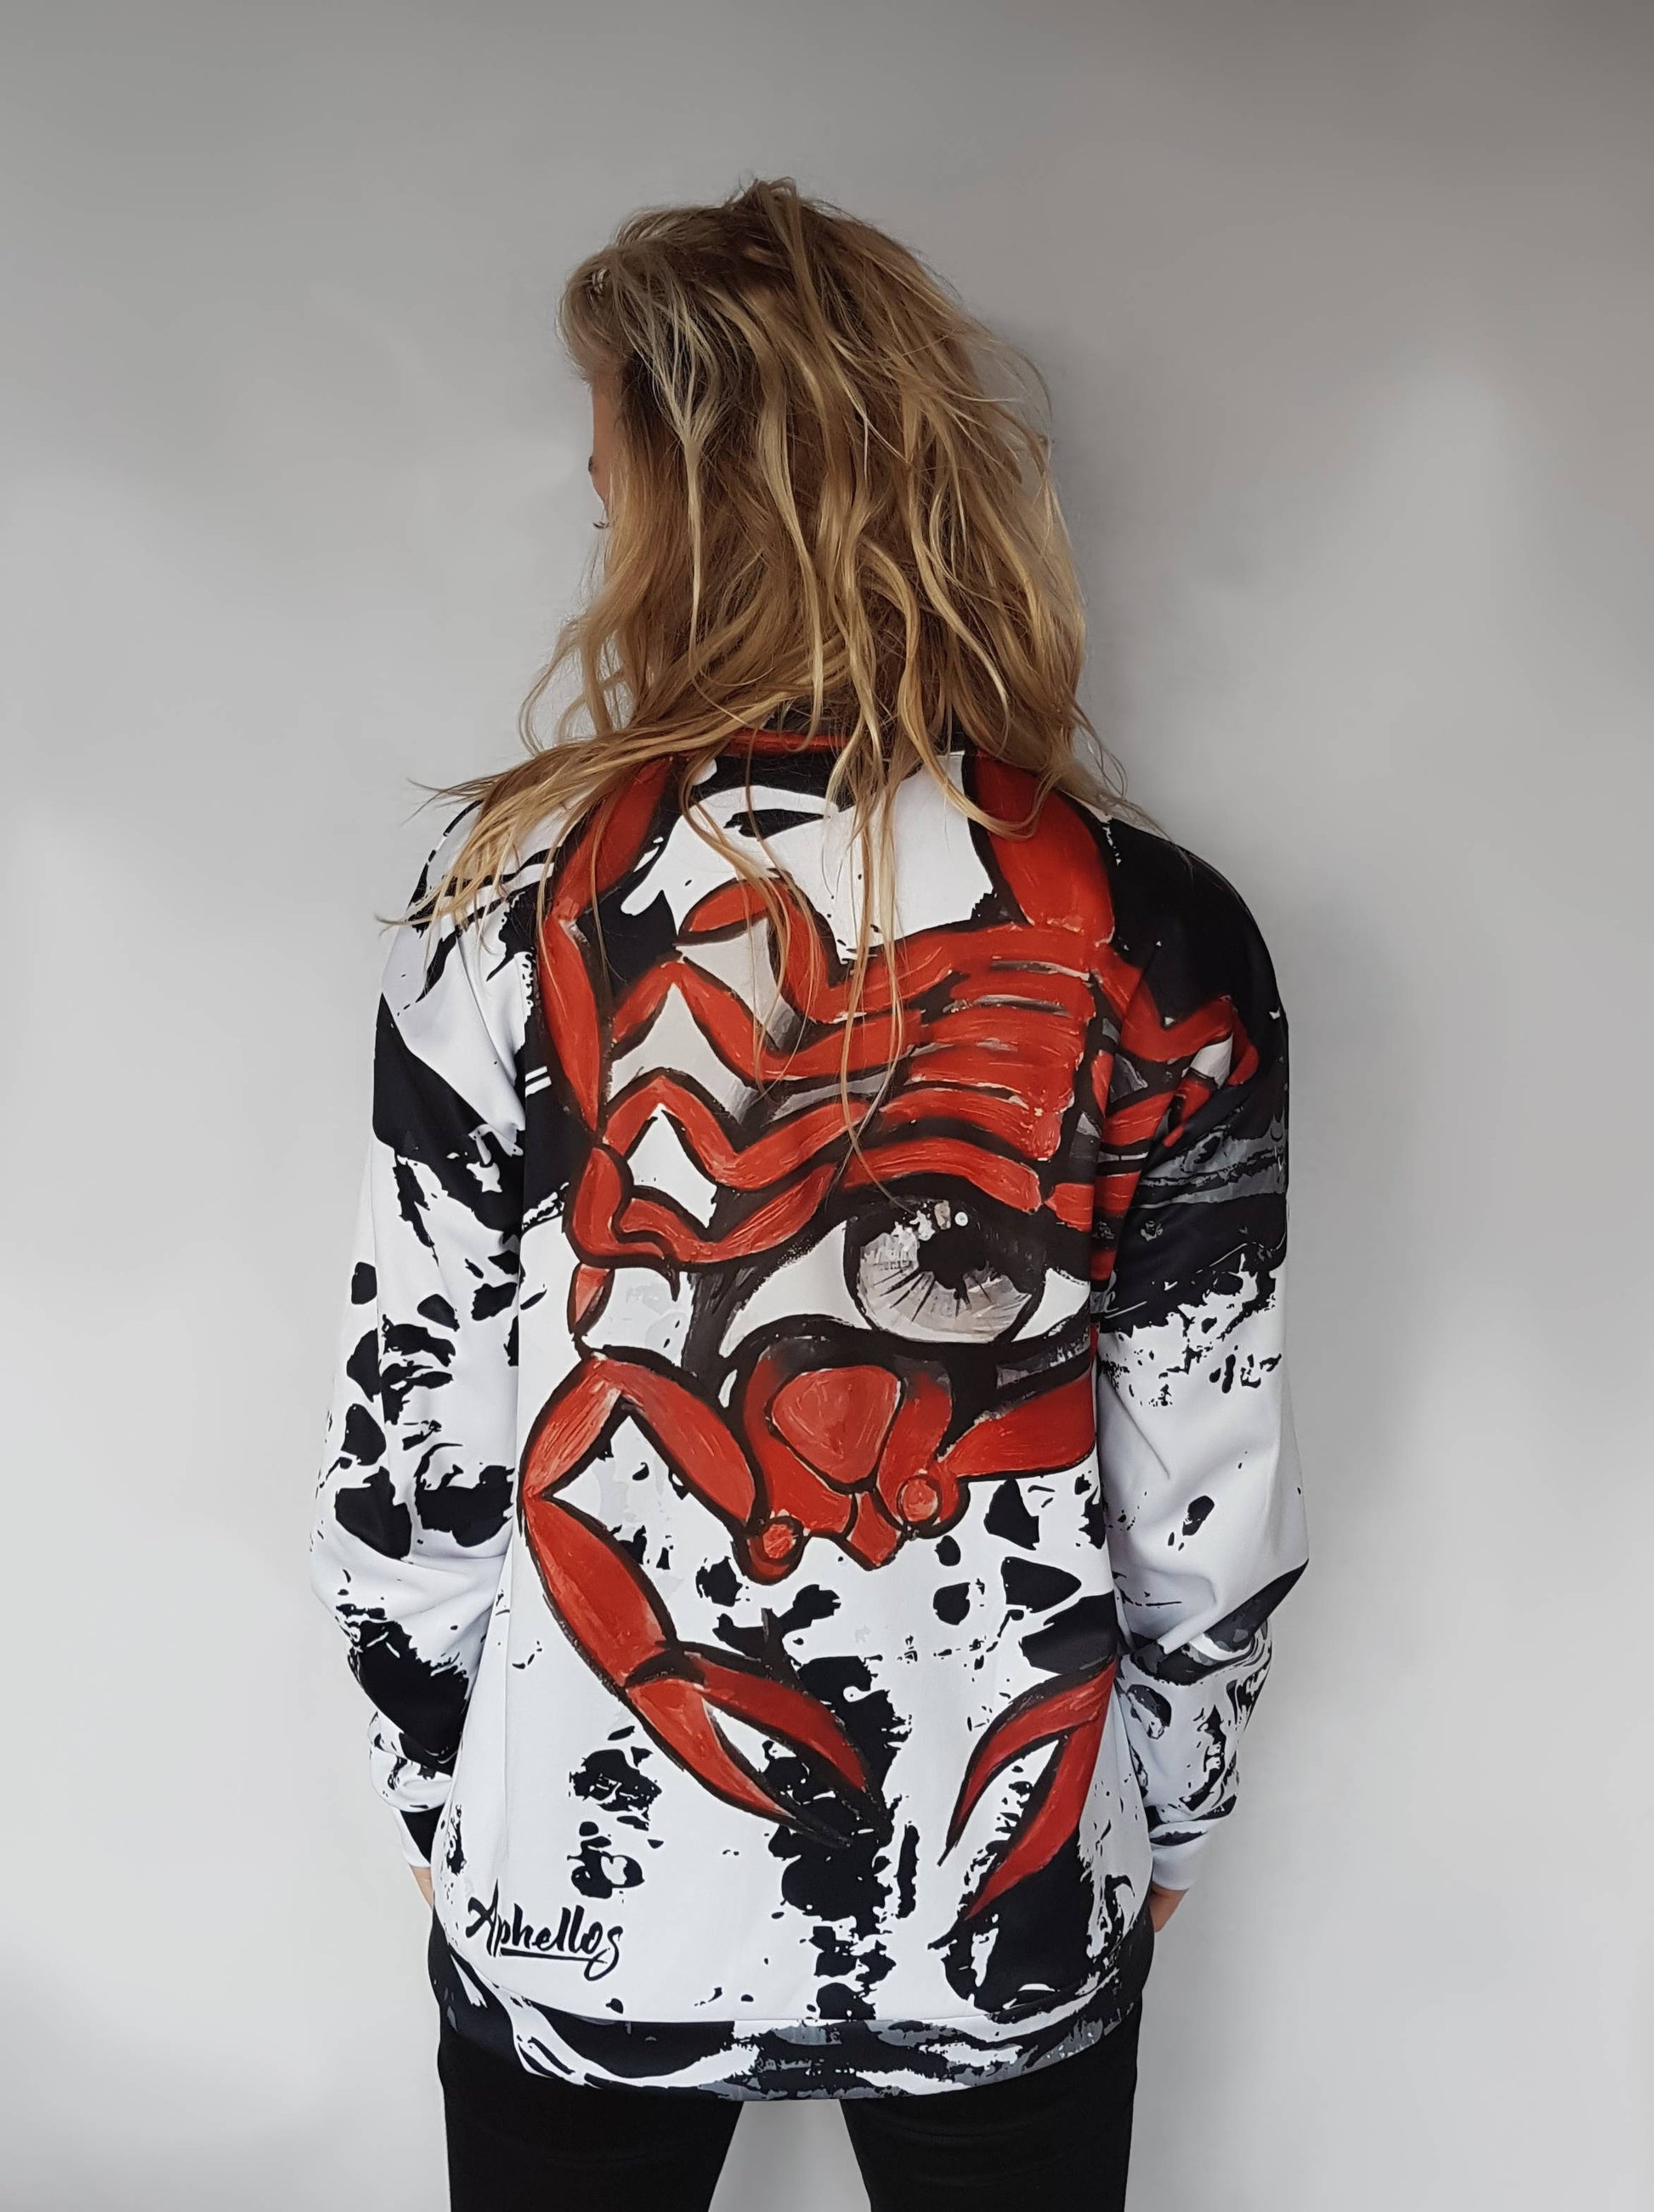 this cool jacket has the image of a giant scorpion on the back and a pretty woman on the front based on art by dutch artist Kim Vermeulen